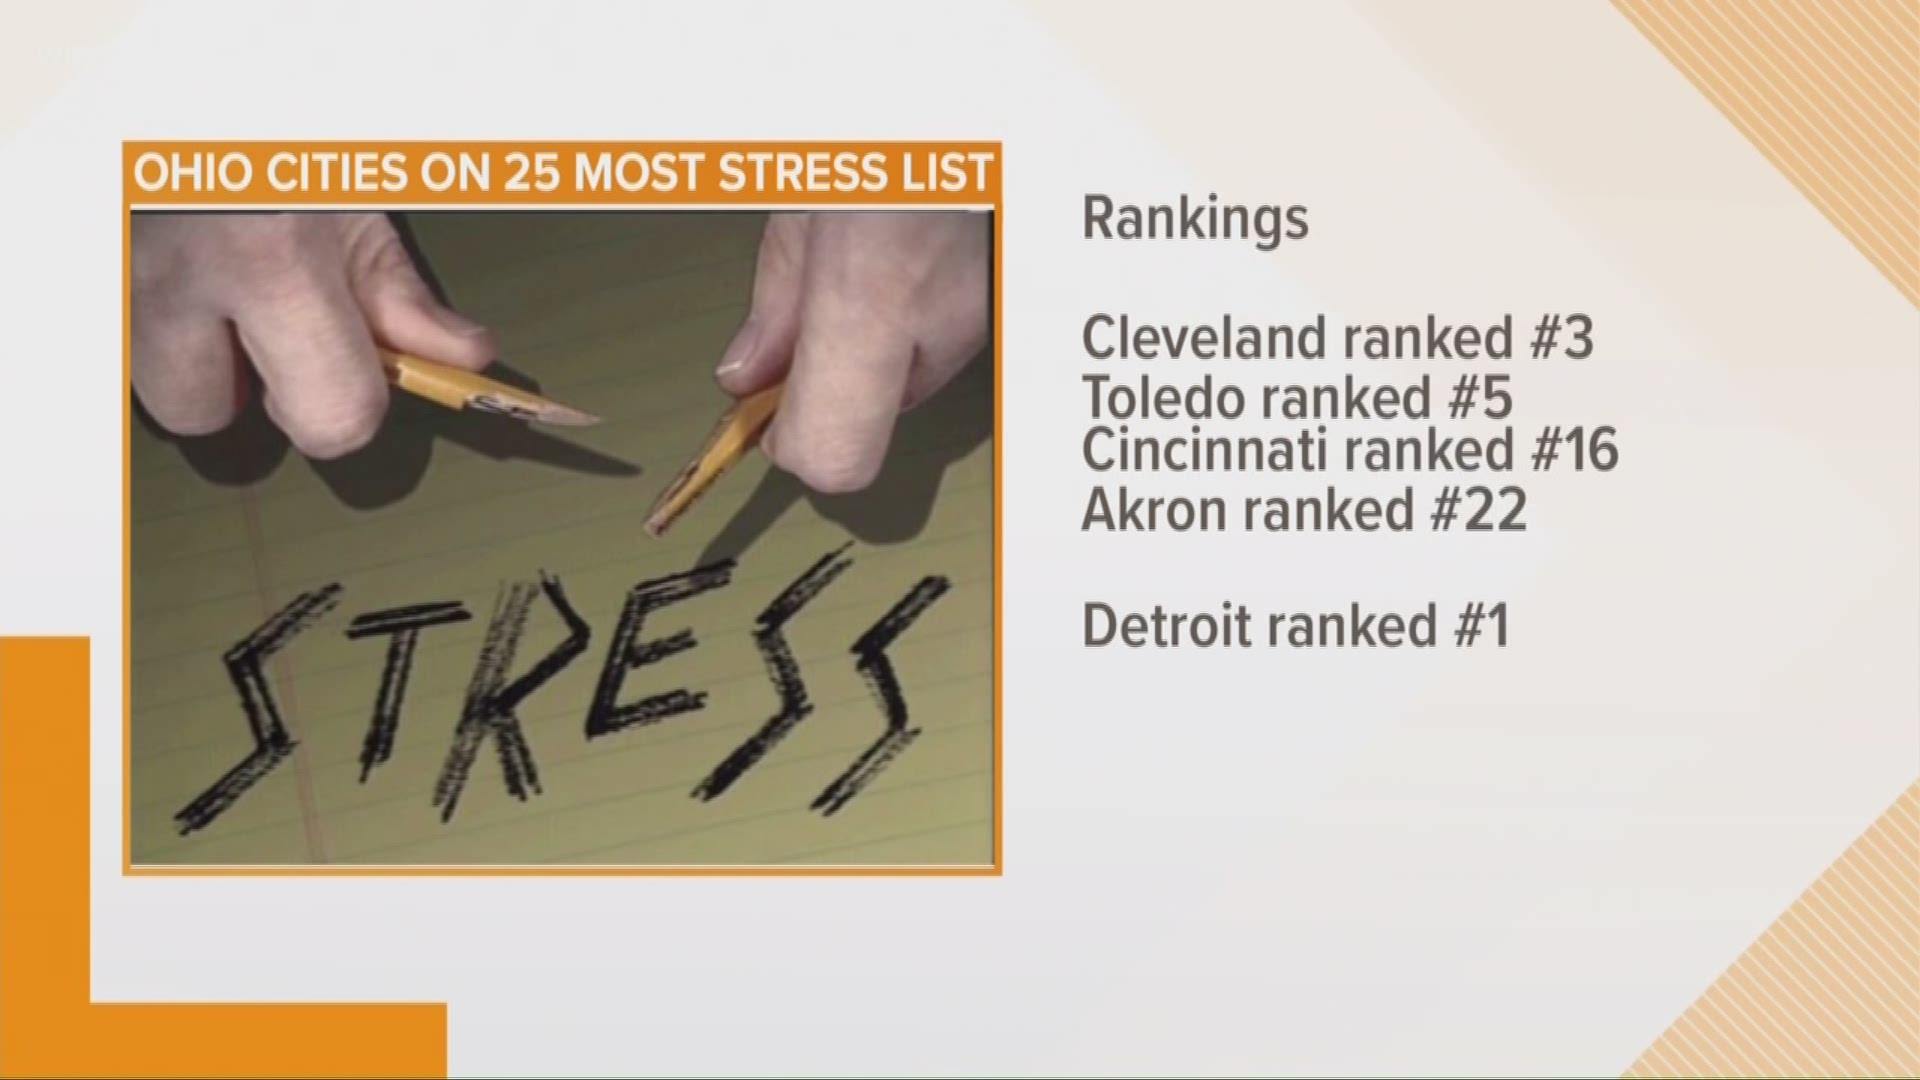 July 17, 2018: A new WalletHub study shows that Ohio has four cities within the top 25 'most stressed' places in America.